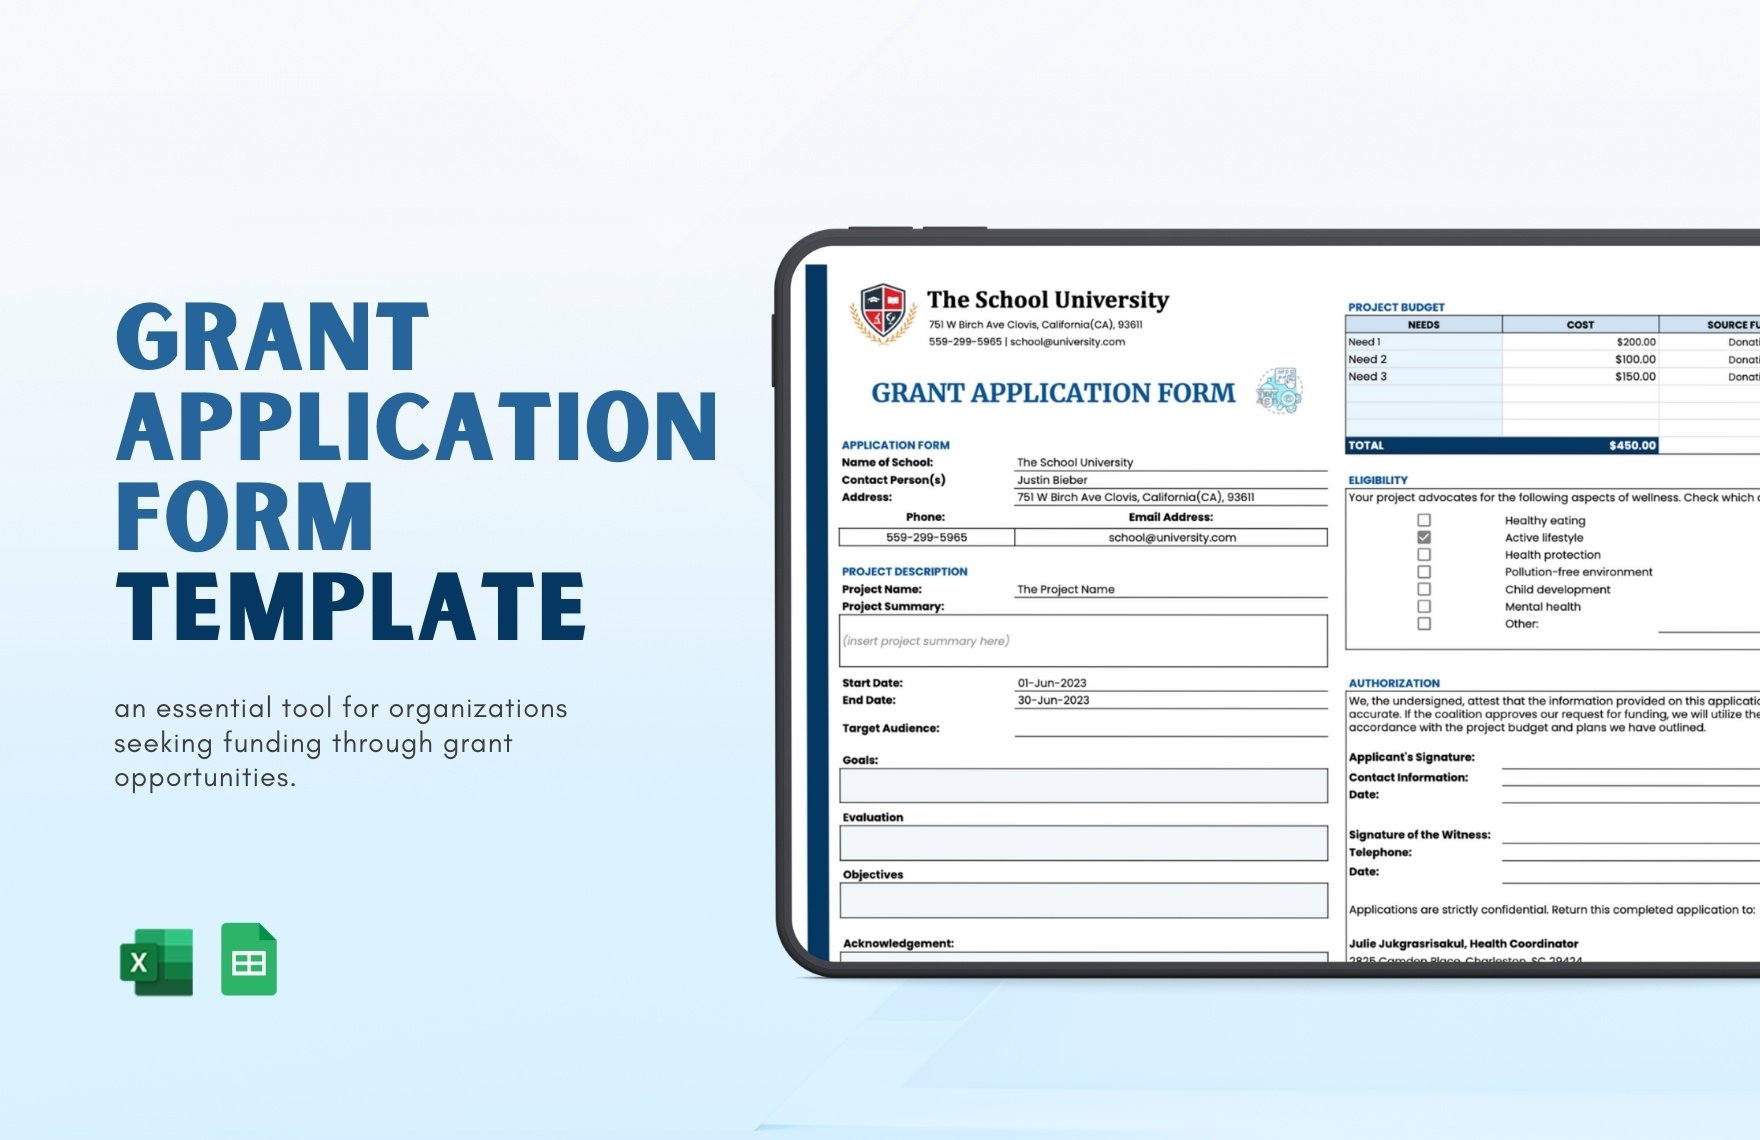 Grant Application Form Template in Excel, Google Sheets